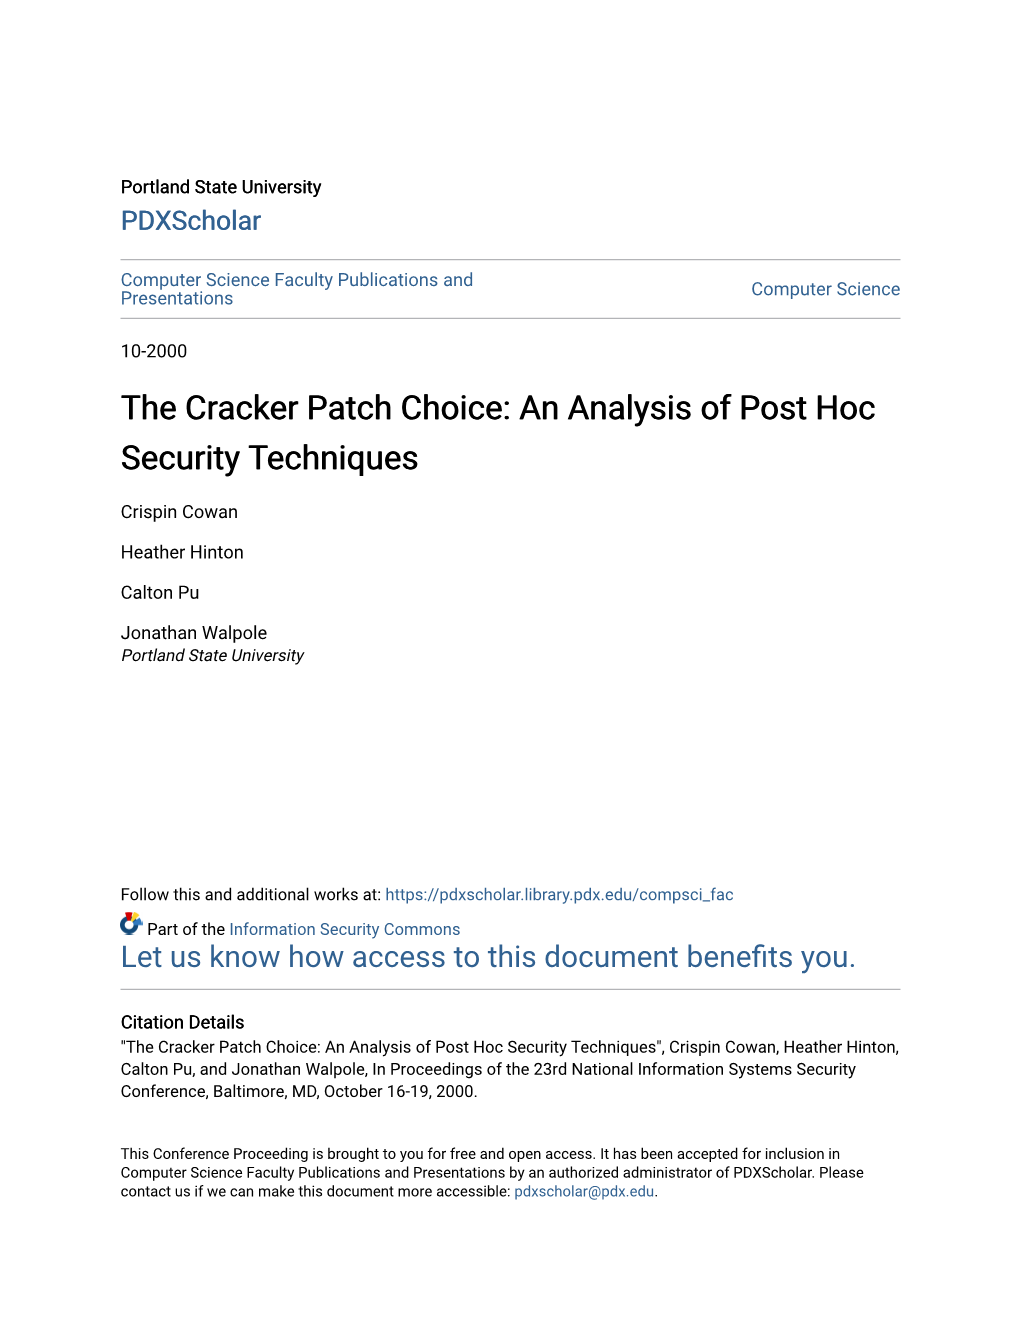 An Analysis of Post Hoc Security Techniques